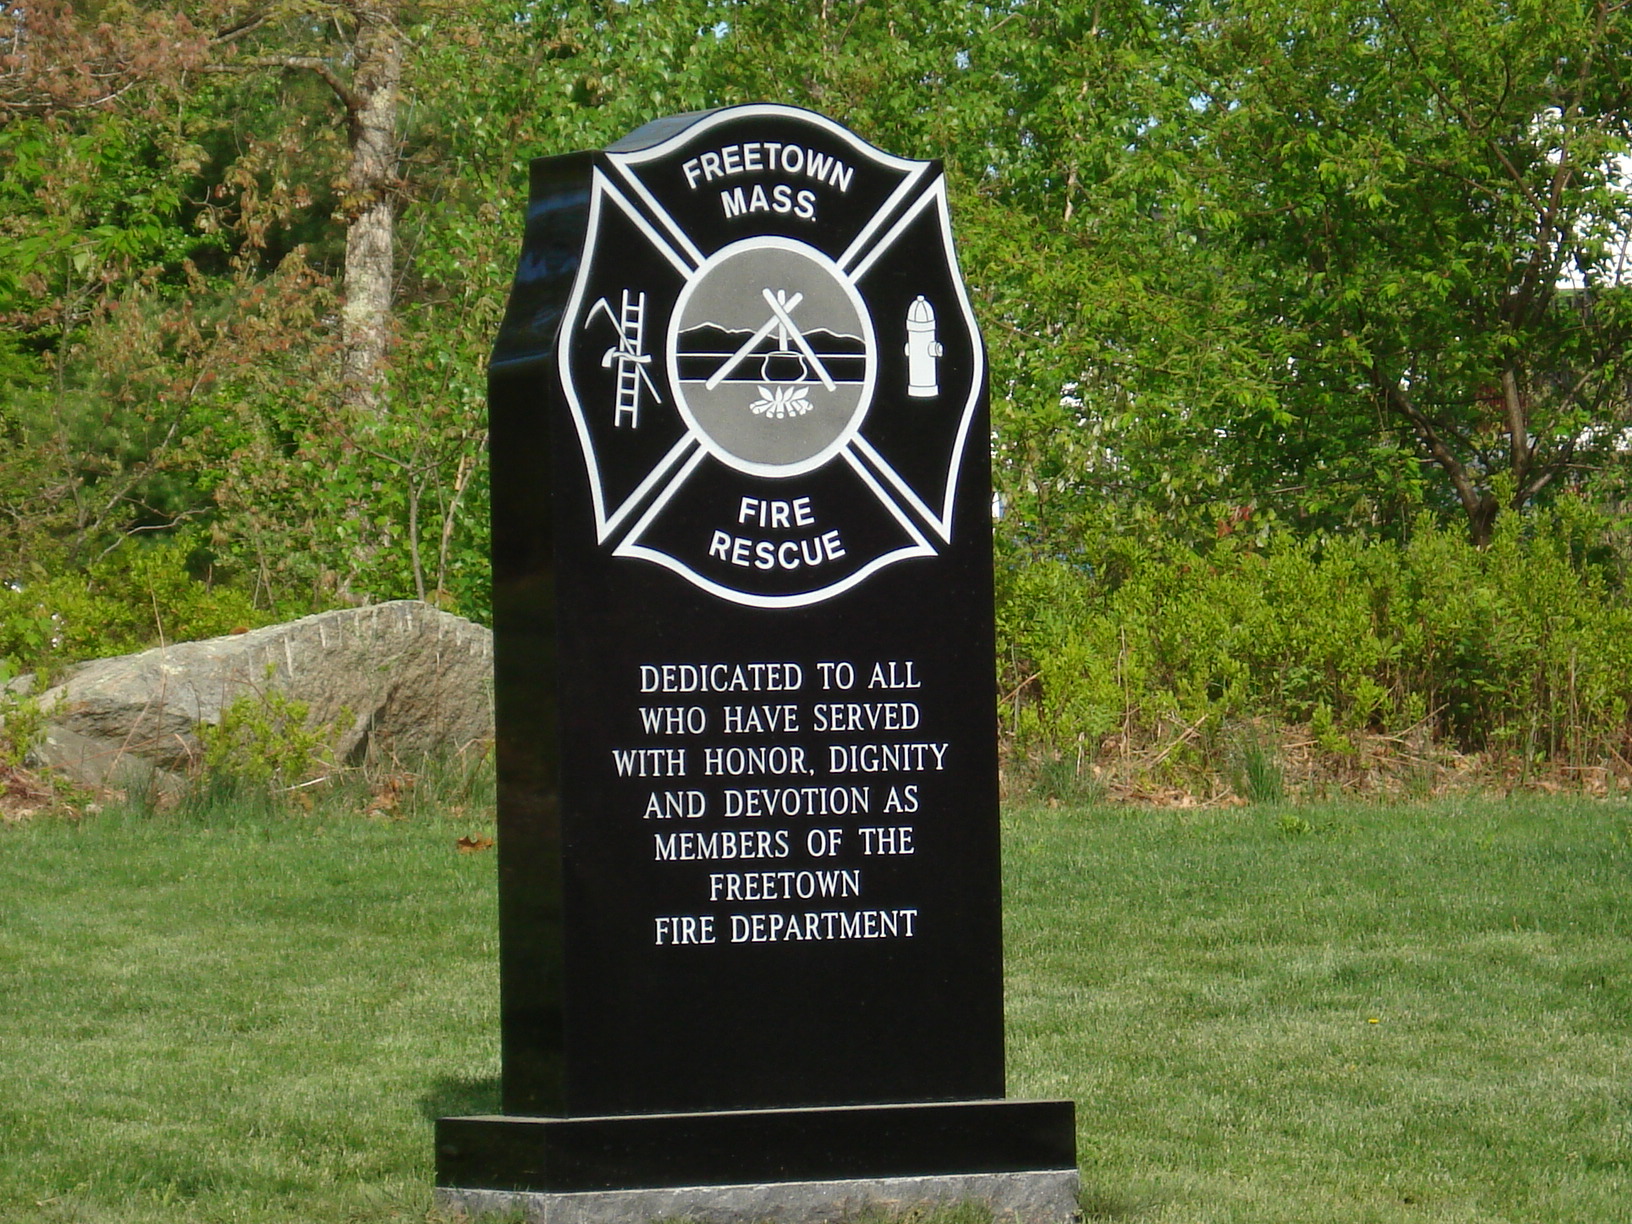 A memorial to those who served as part of the fire dept.